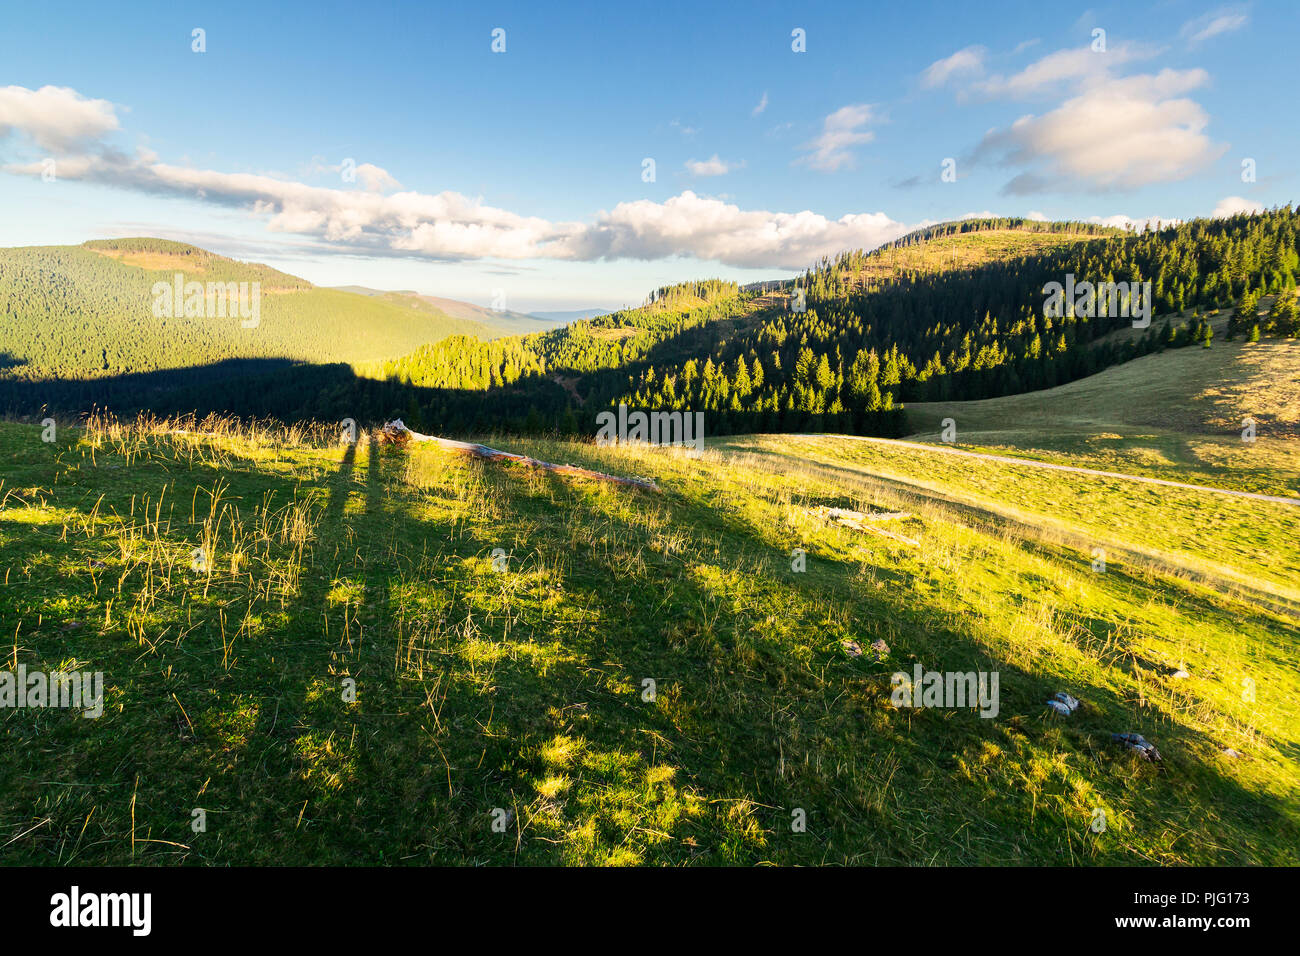 autumn landscape in mountains at sunset. beautiful sky with fluffy clouds above spruce forest on hills. long shadows on the grassy meadow Stock Photo